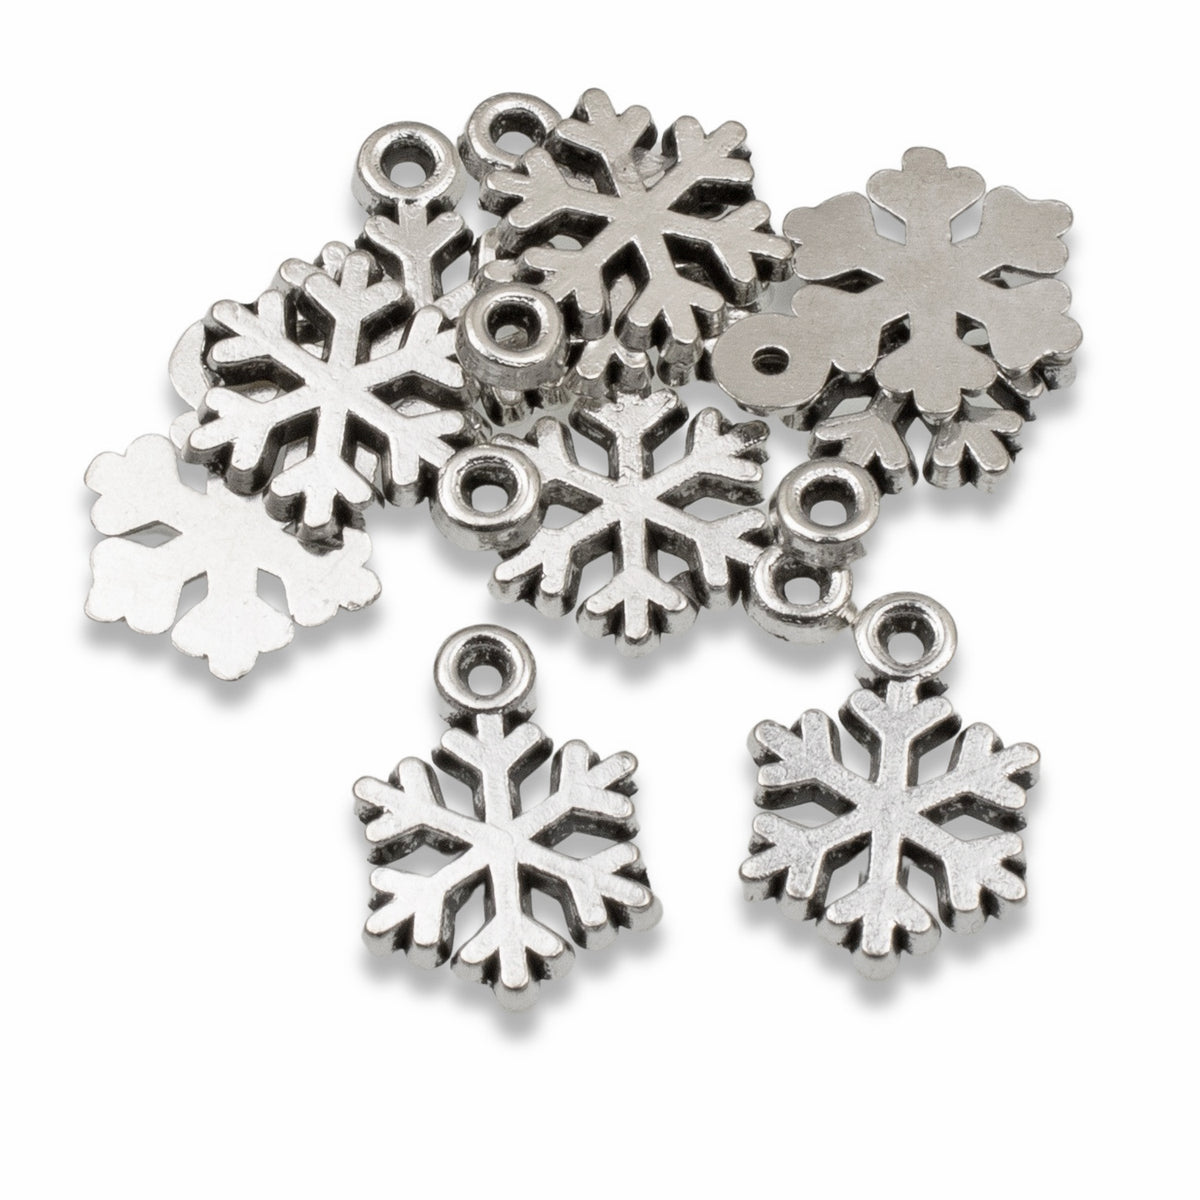 Mini Silver Christmas Charms Mix - Wreath Snowflake Candy Cane Reindeer  Christmas Tree Nail Jewelry Decor – Daily Charme